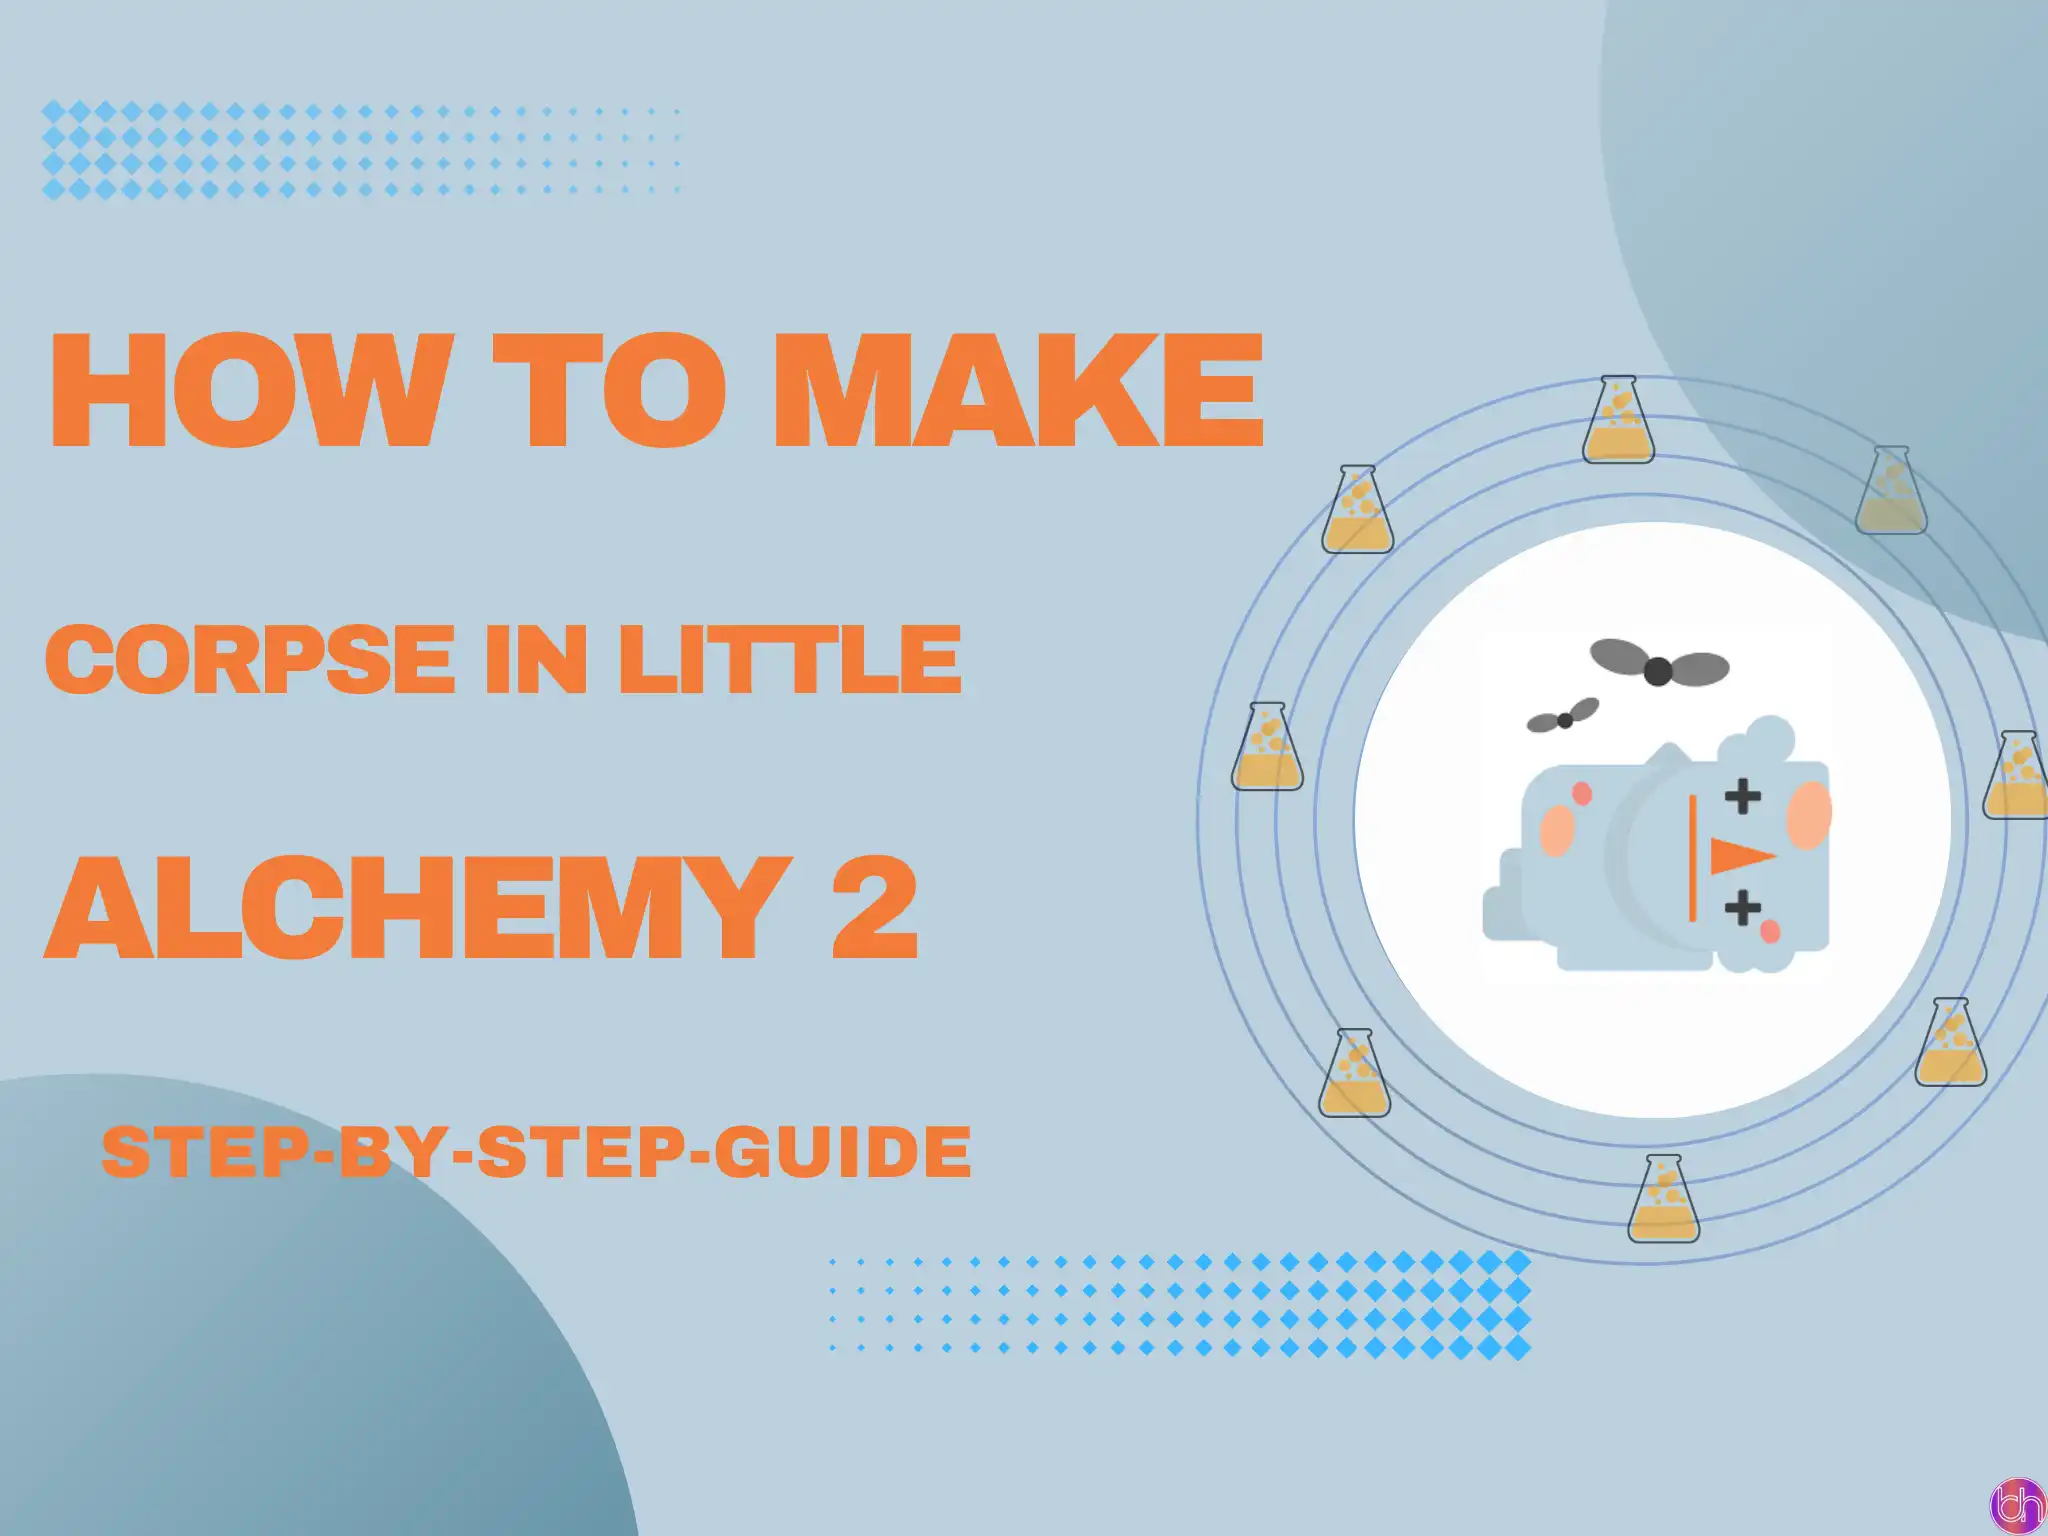 How to make Corpse in Little Alchemy 2